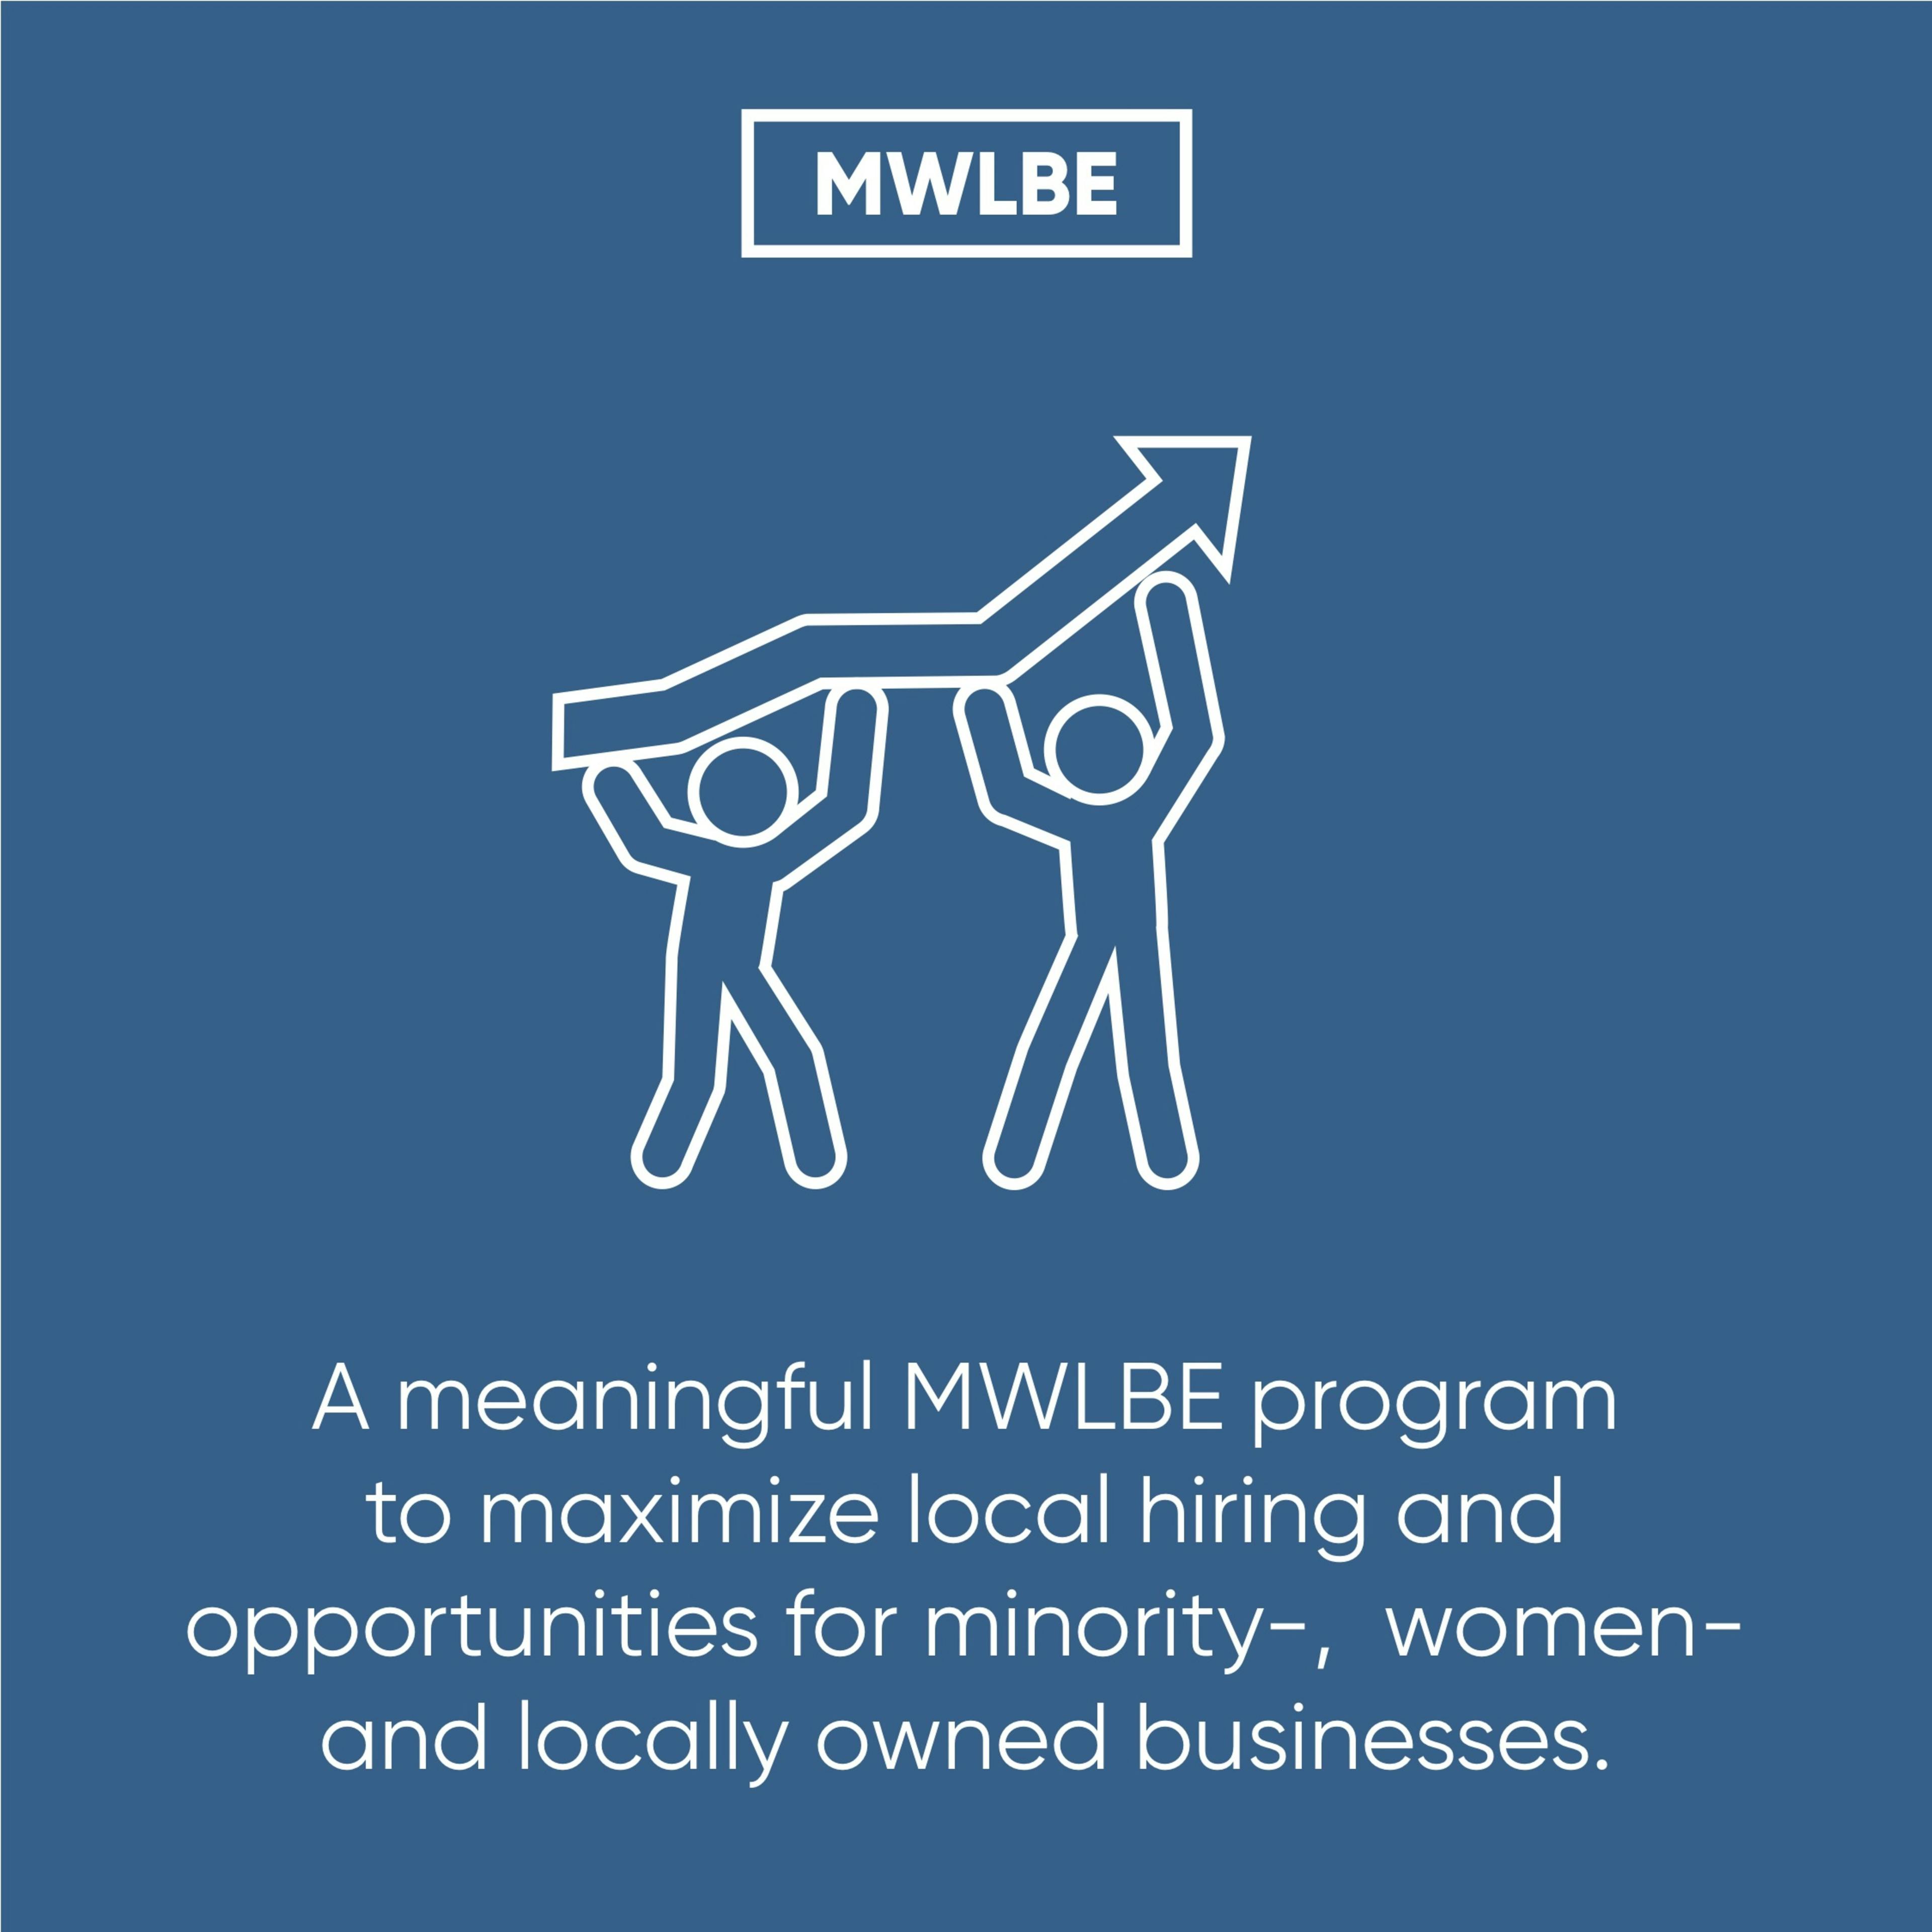 Infographic text: MWLBE. A meaningful MWLBE program to maximize local hiringg and opportunities for minority-, women- and locally owned businesses.